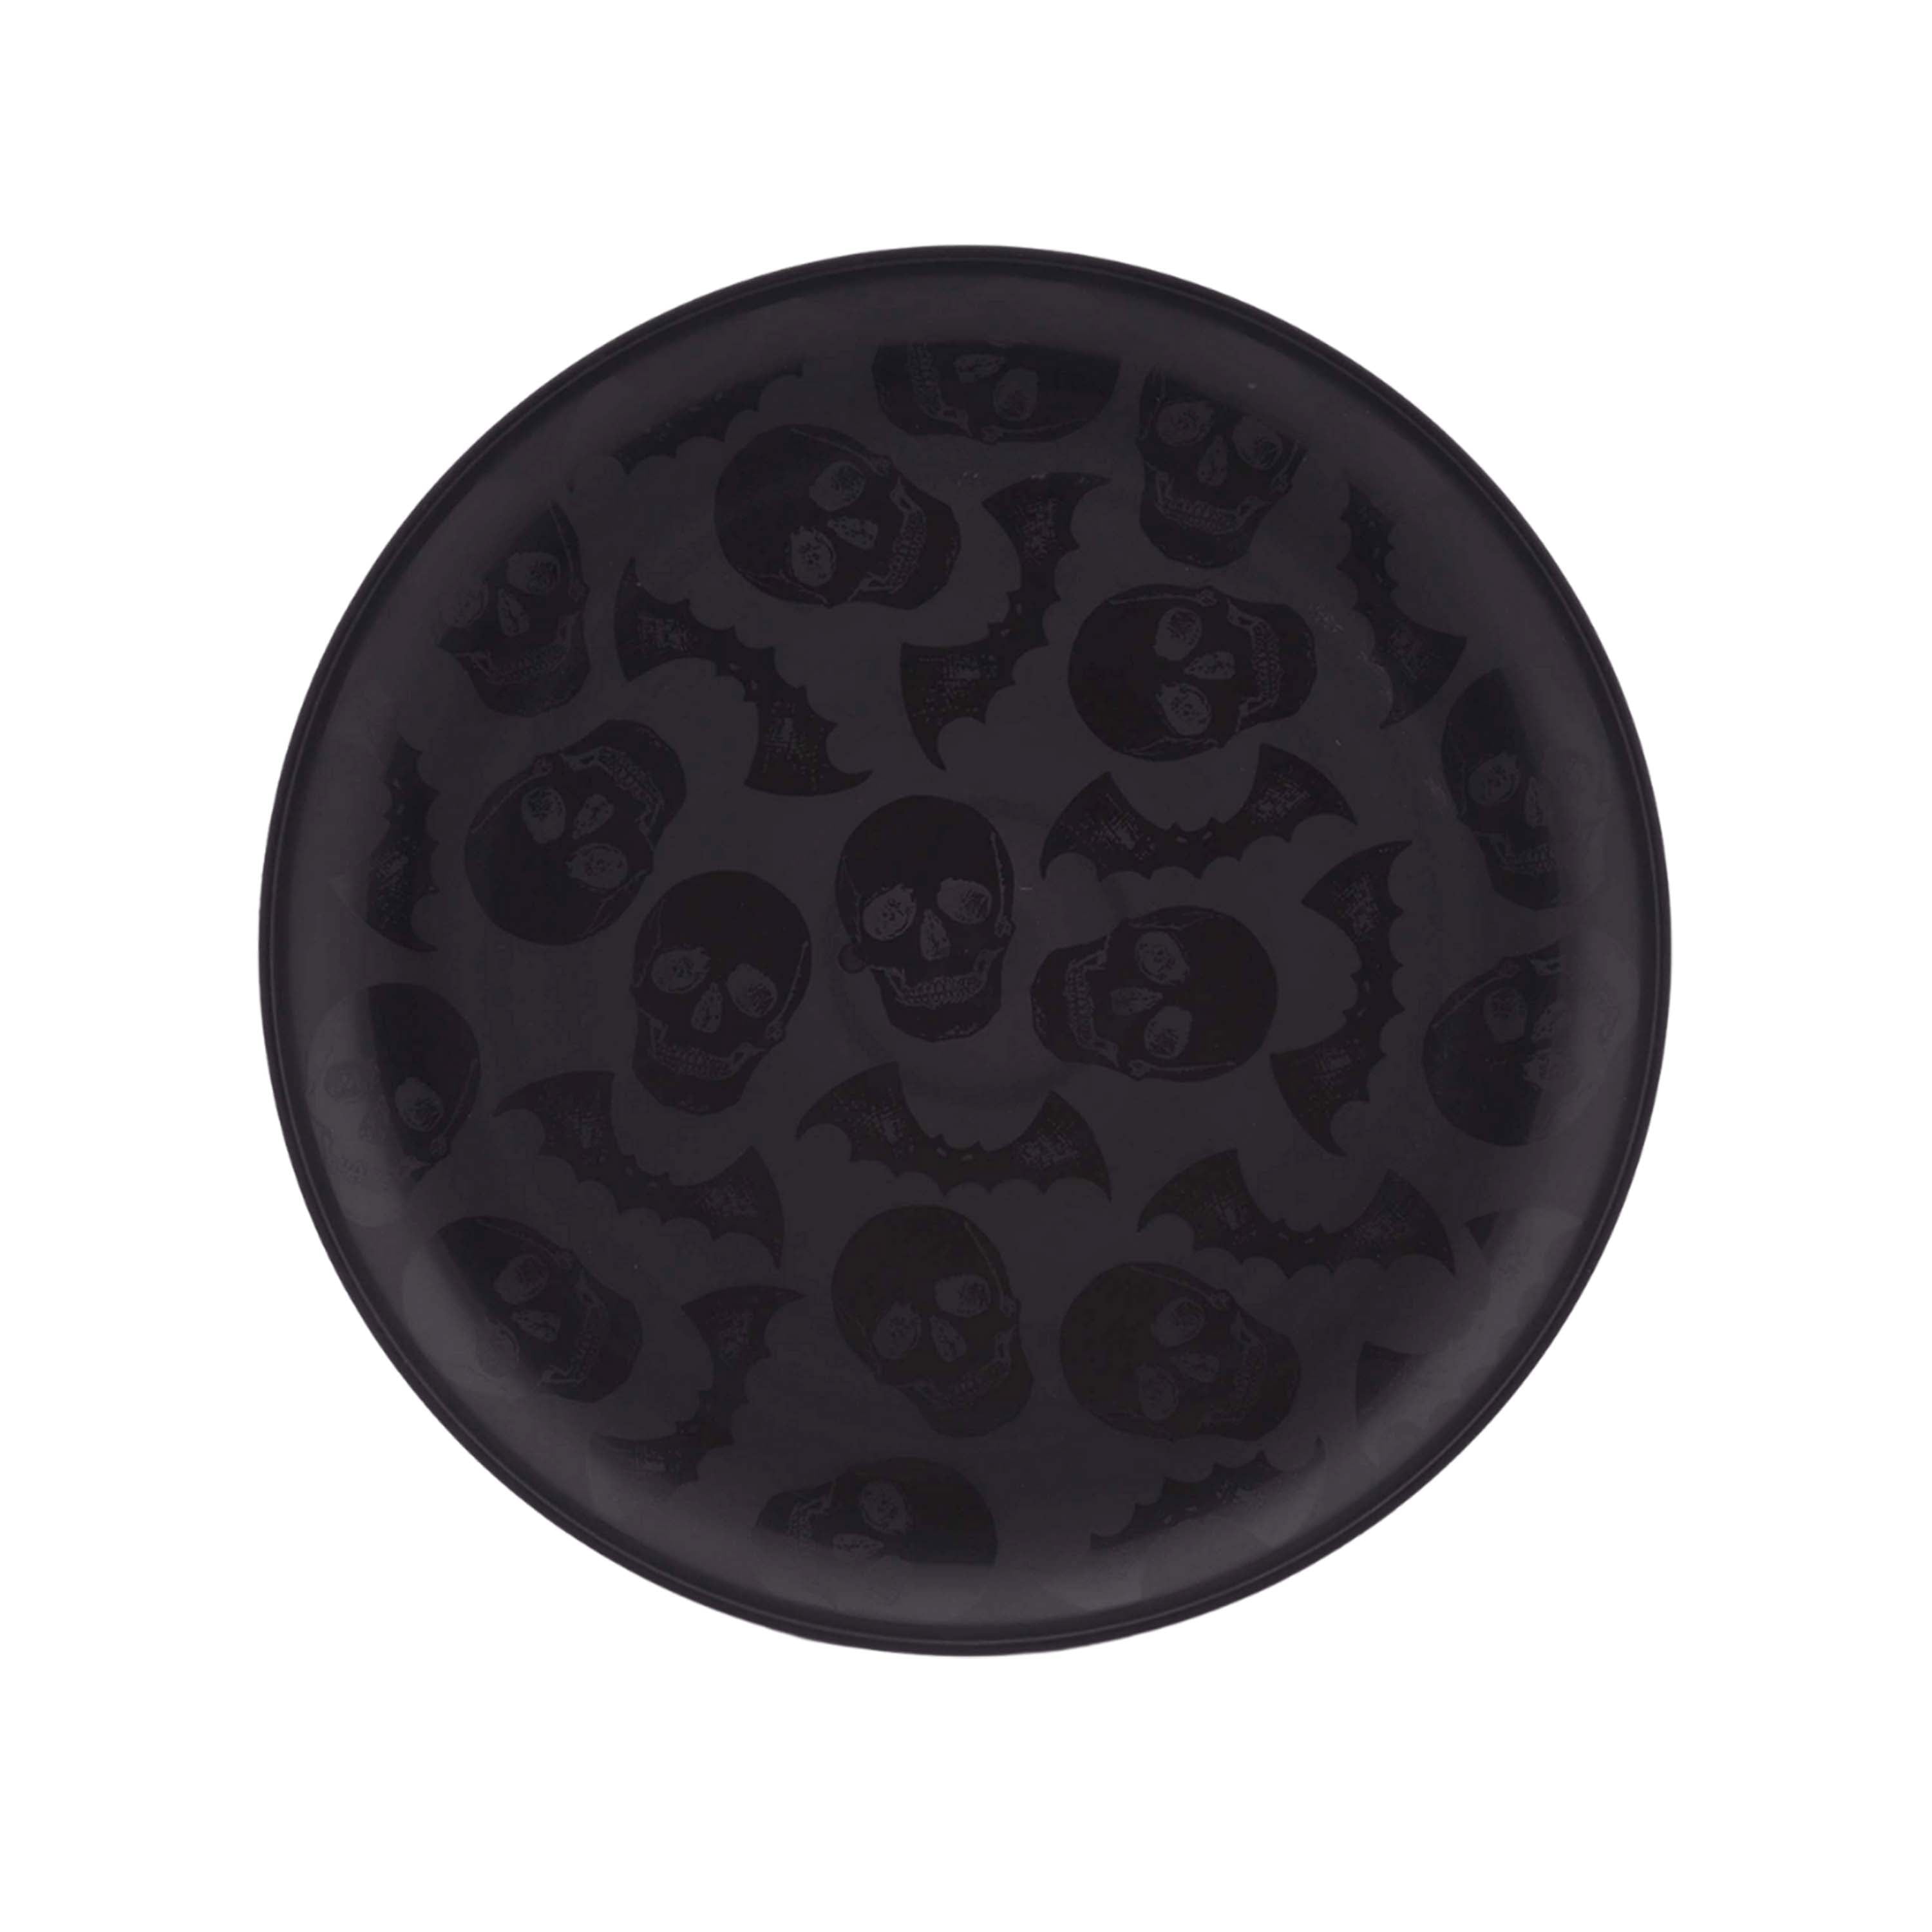 Heavy Duty Black Plastic Plates With Silvery Lace Design - 15 Dinner Plates  And 15 Dessert Plates - Perfect For Parties, Day Of The Dead, Halloween,  And Graduation - Unique And Unusual